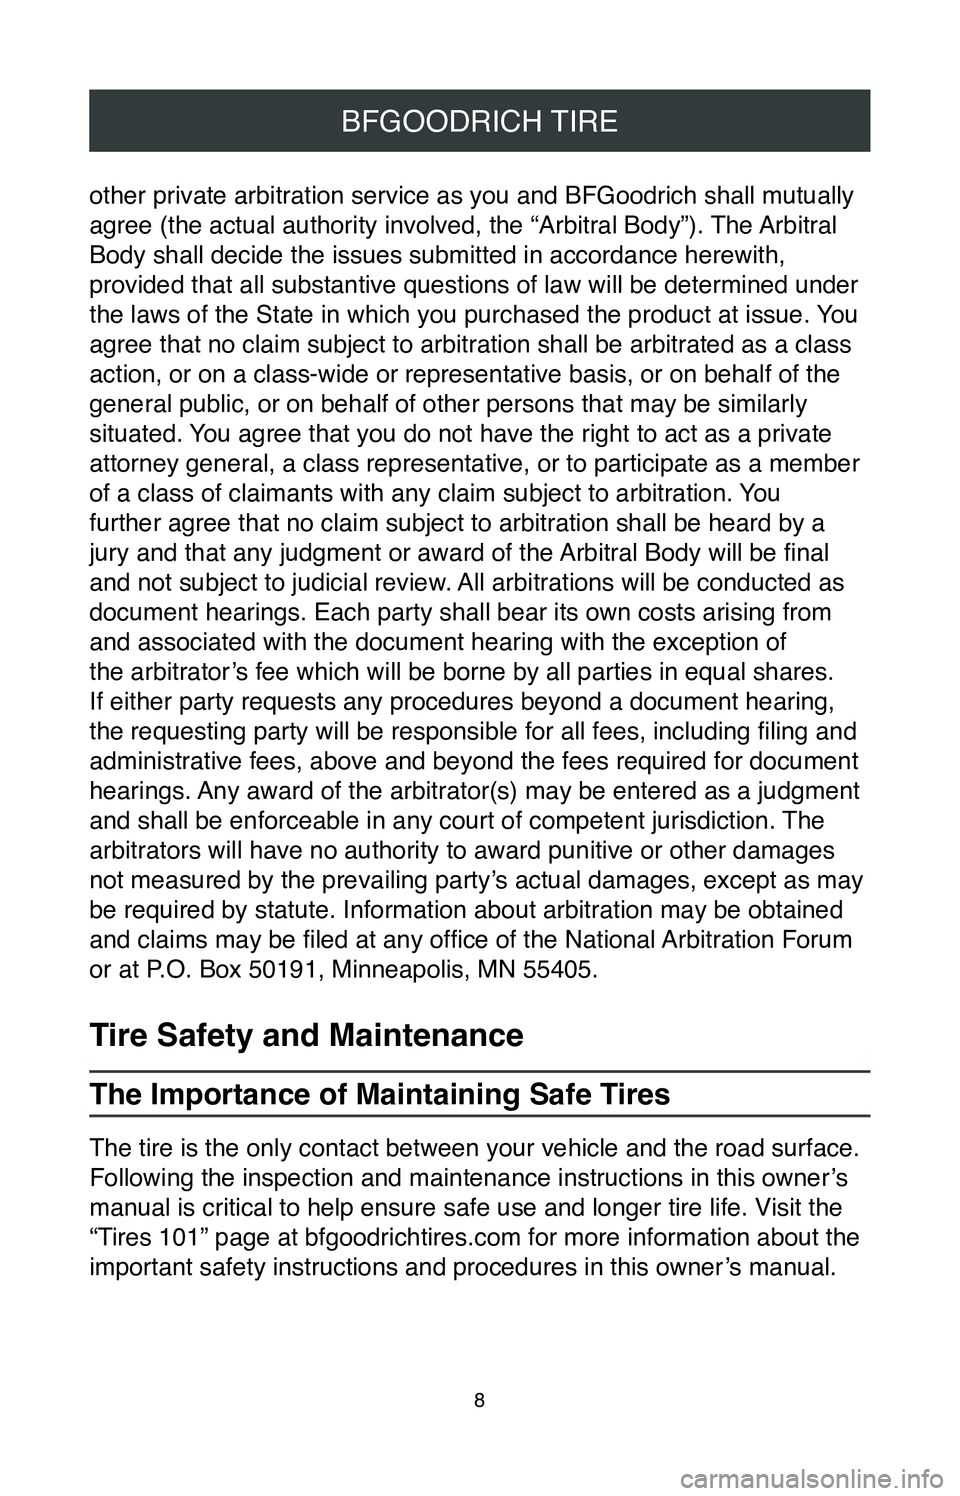 TOYOTA COROLLA 2020  Warranties & Maintenance Guides (in English) 8
BFGOODRICH TIRE
other private arbitration service as you and BFGoodrich shall mutually 
agree (the actual authority involved, the “Arbitral Body”). The Arbitral 
Body shall decide the issues sub